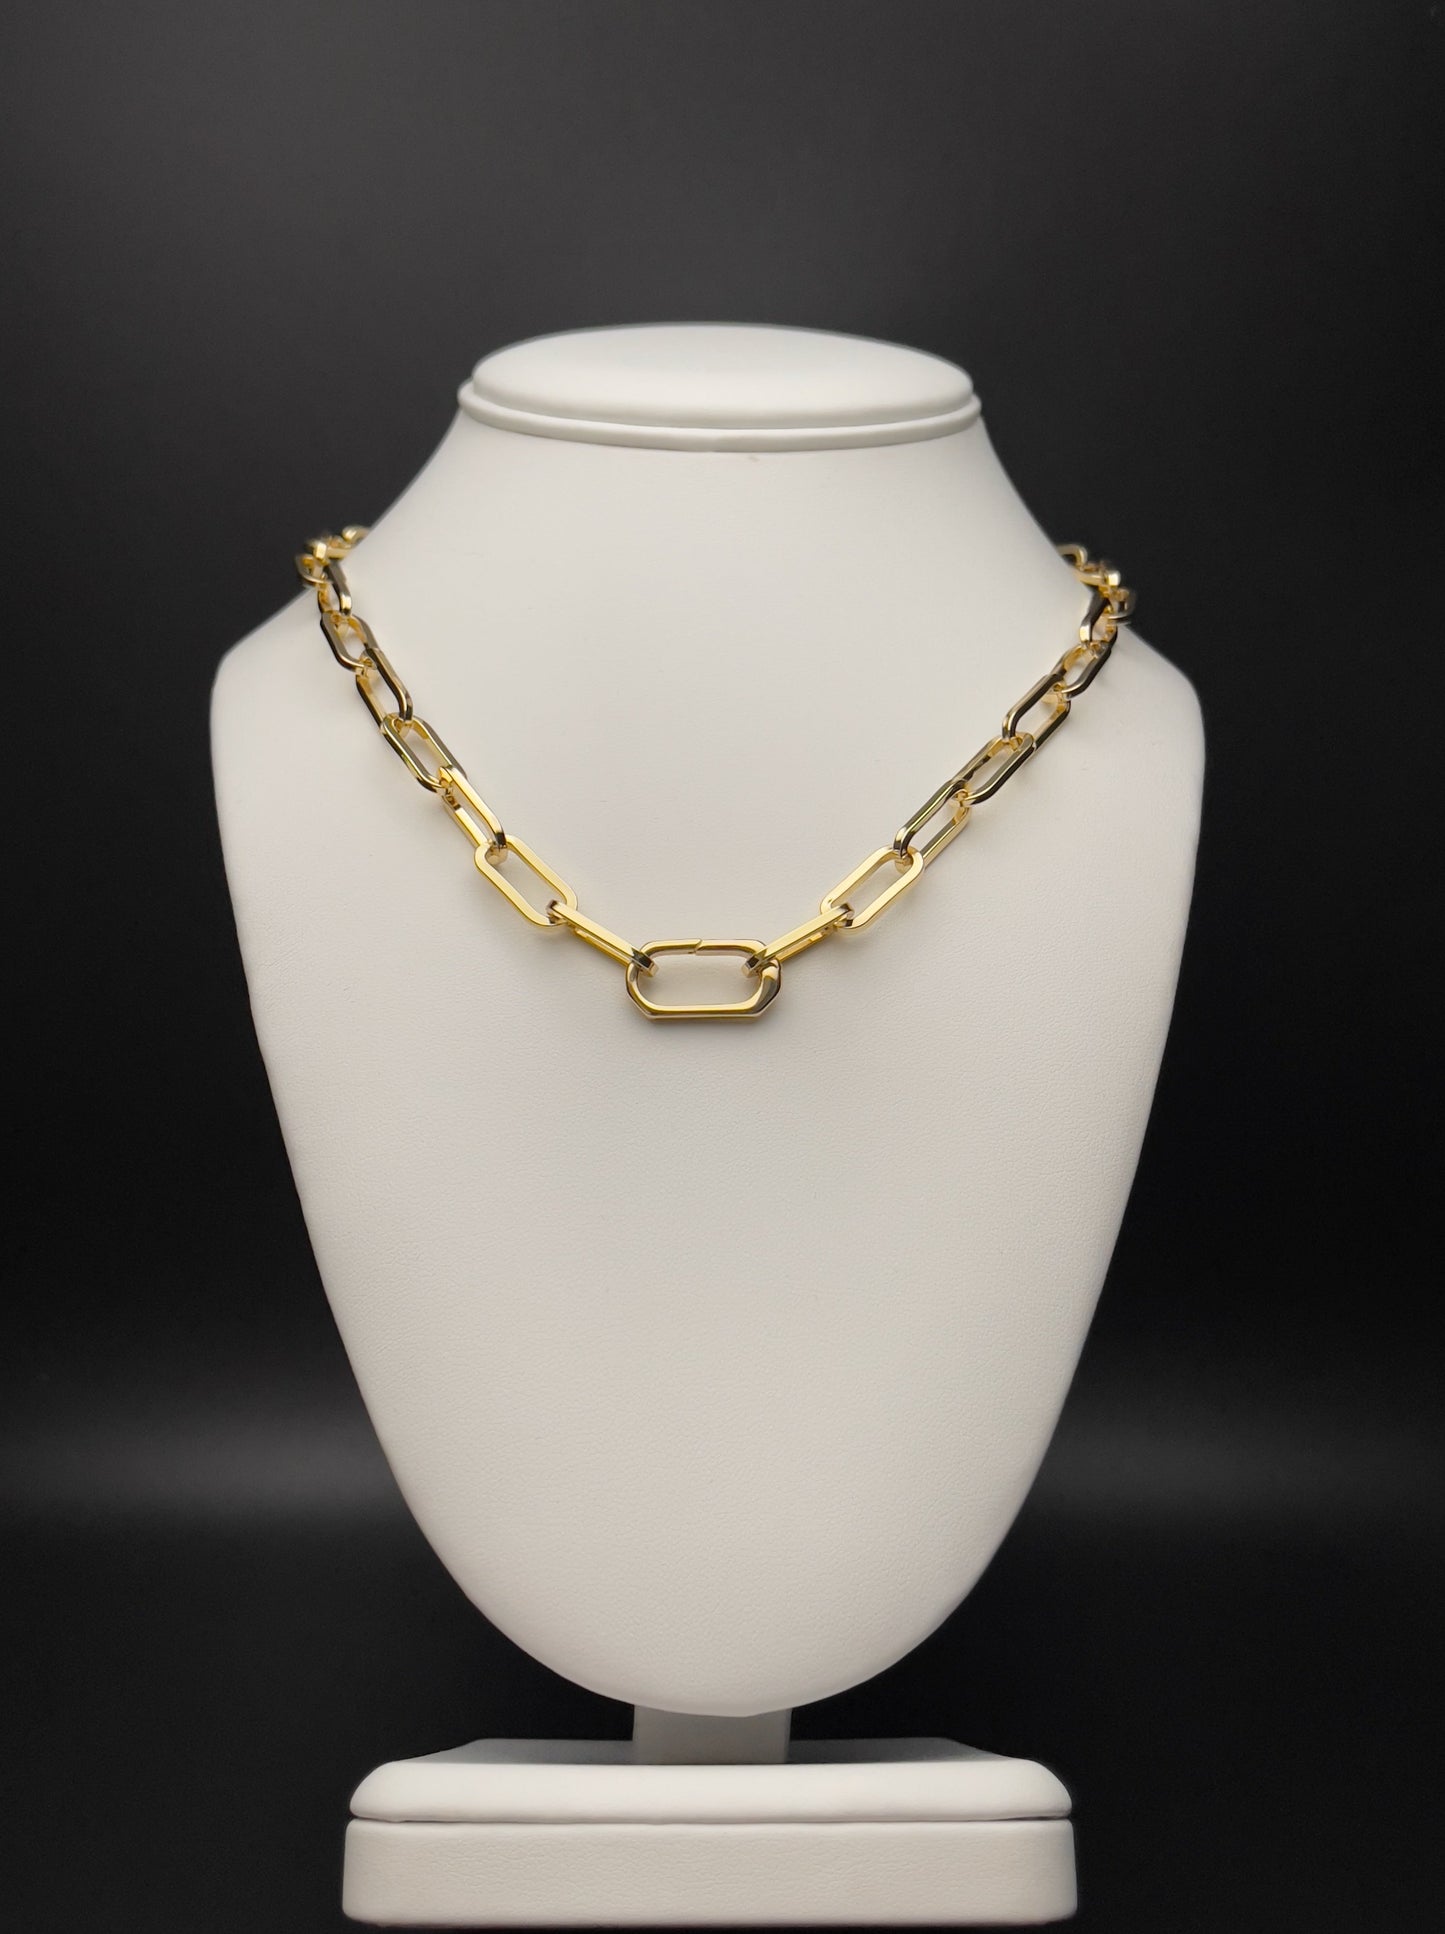 Image of necklace made with paperclip chain.  